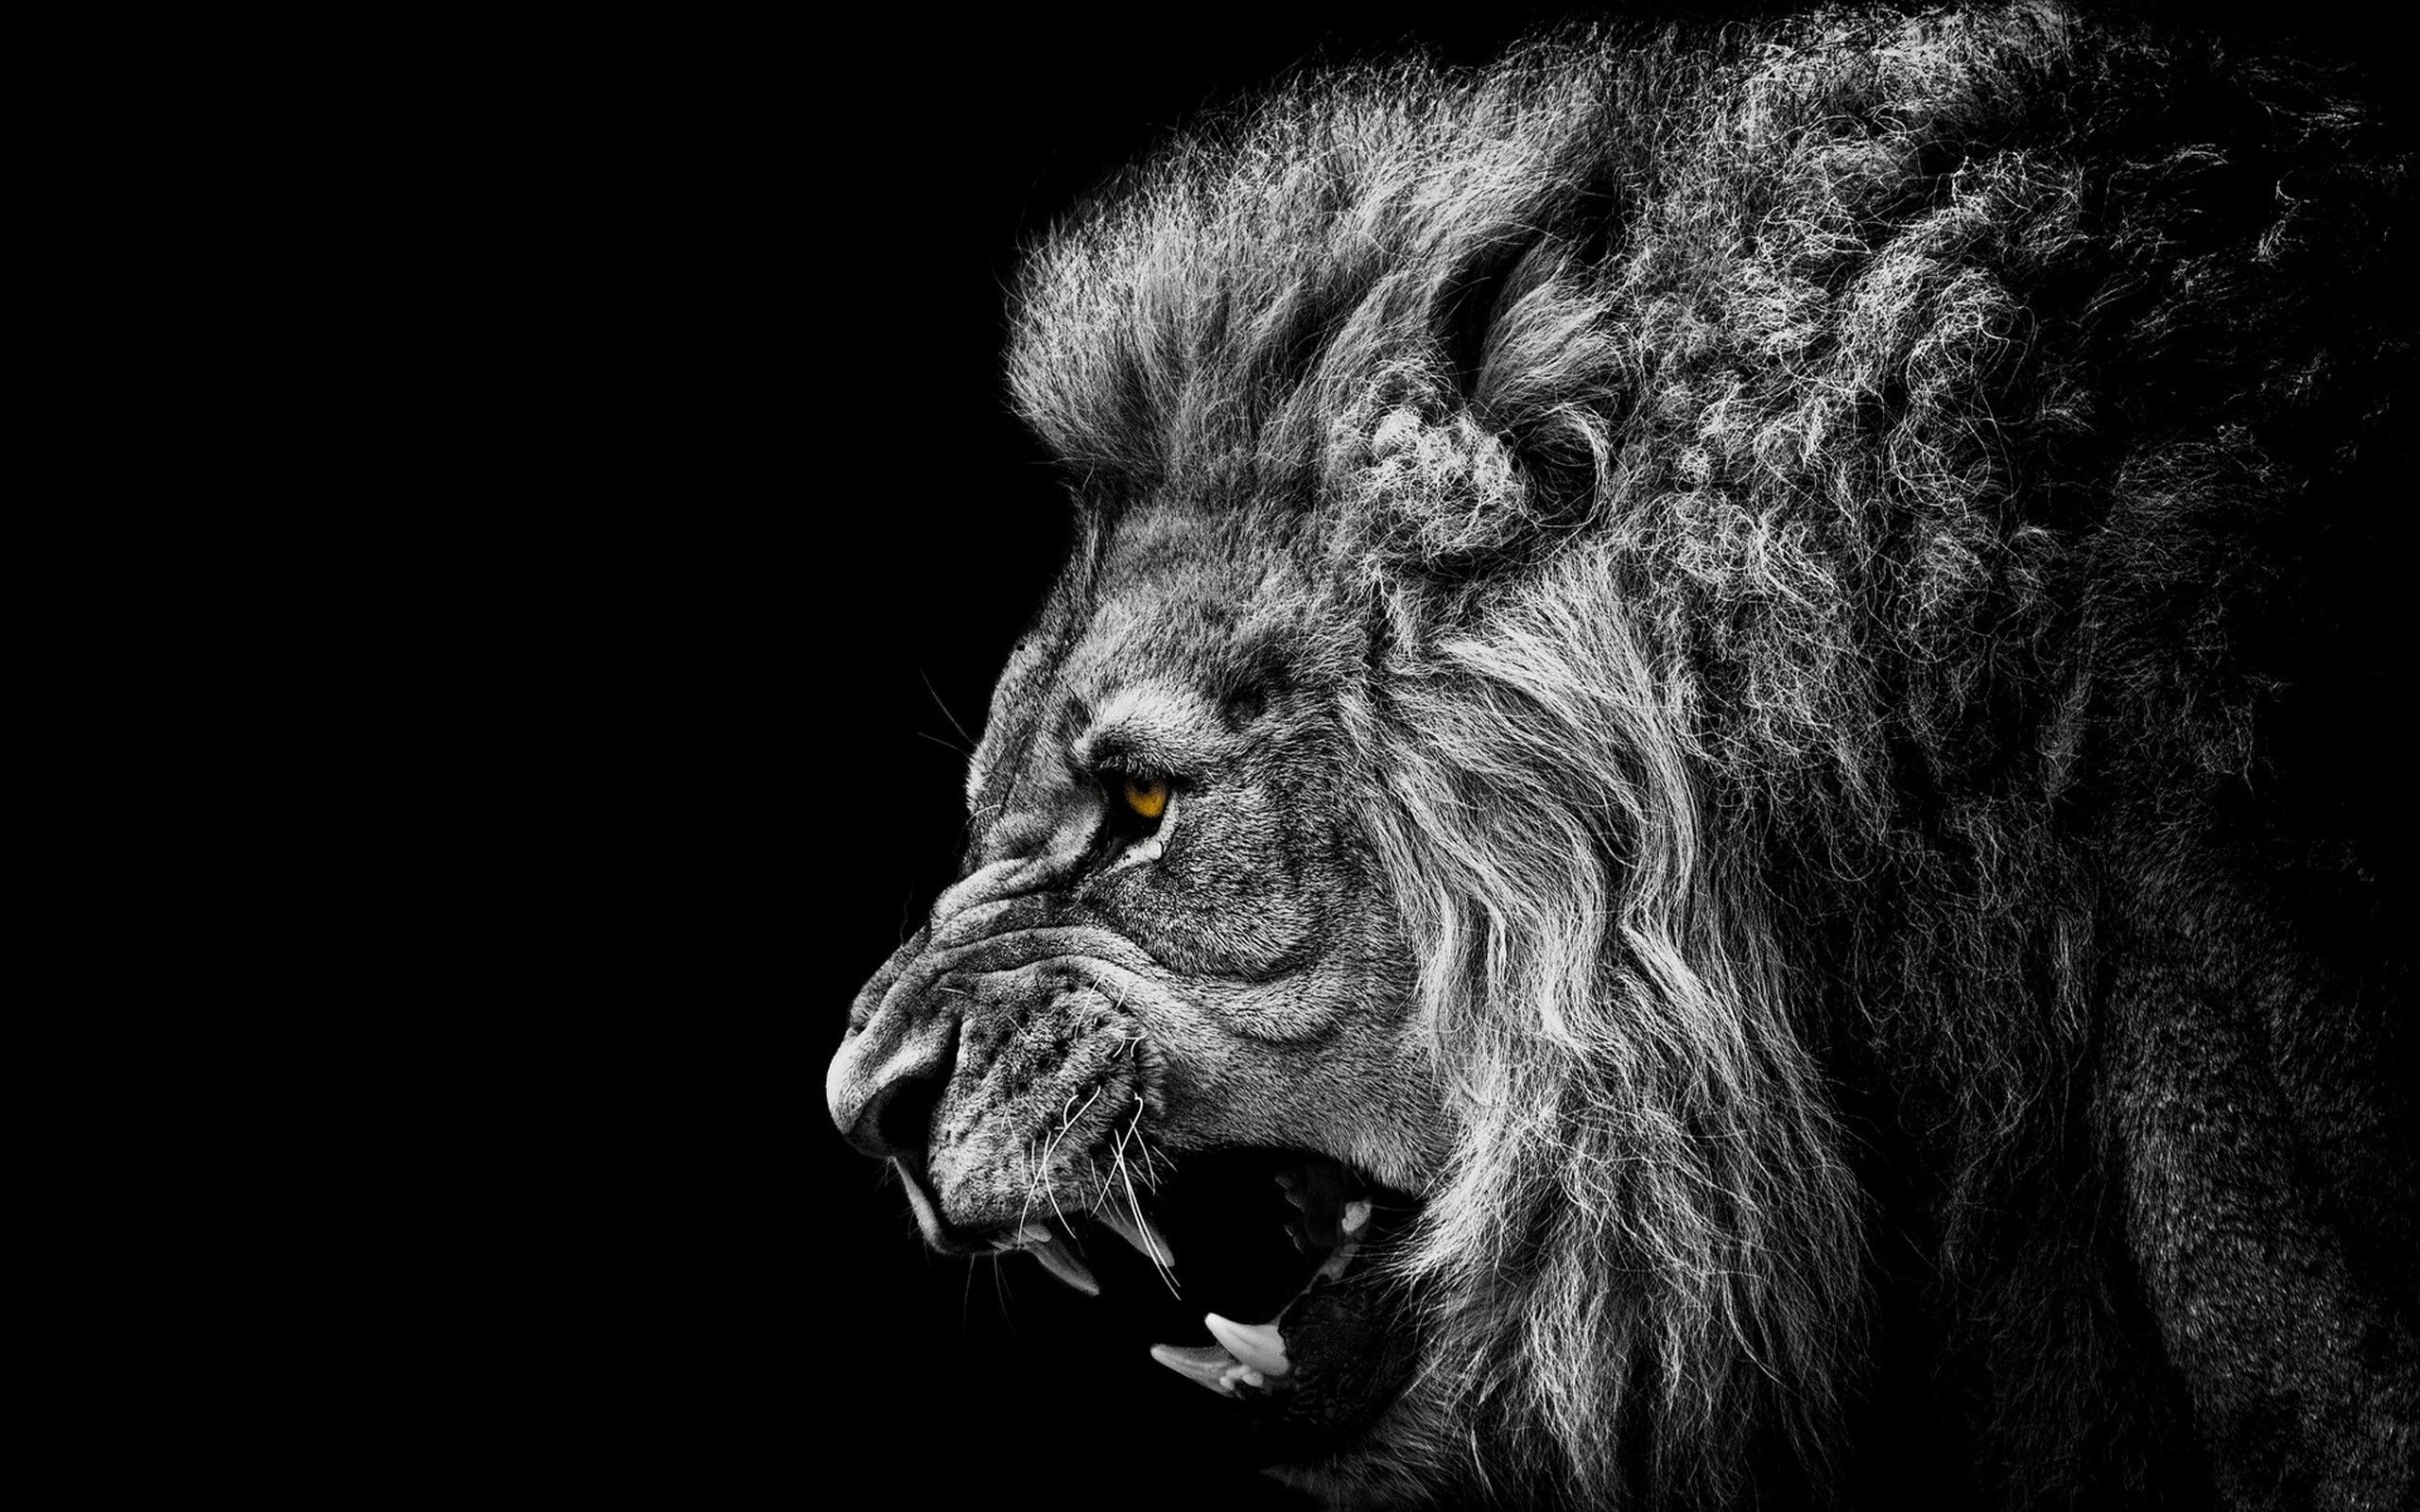 Wallpaper, face, animals, artwork, lion, wildlife, Africa, big cats, whiskers, head, roar, darkness, 2560x1600 px, computer wallpaper, black and white, monochrome photography, close up, cat like mammal, snout, carnivoran, organism, stock